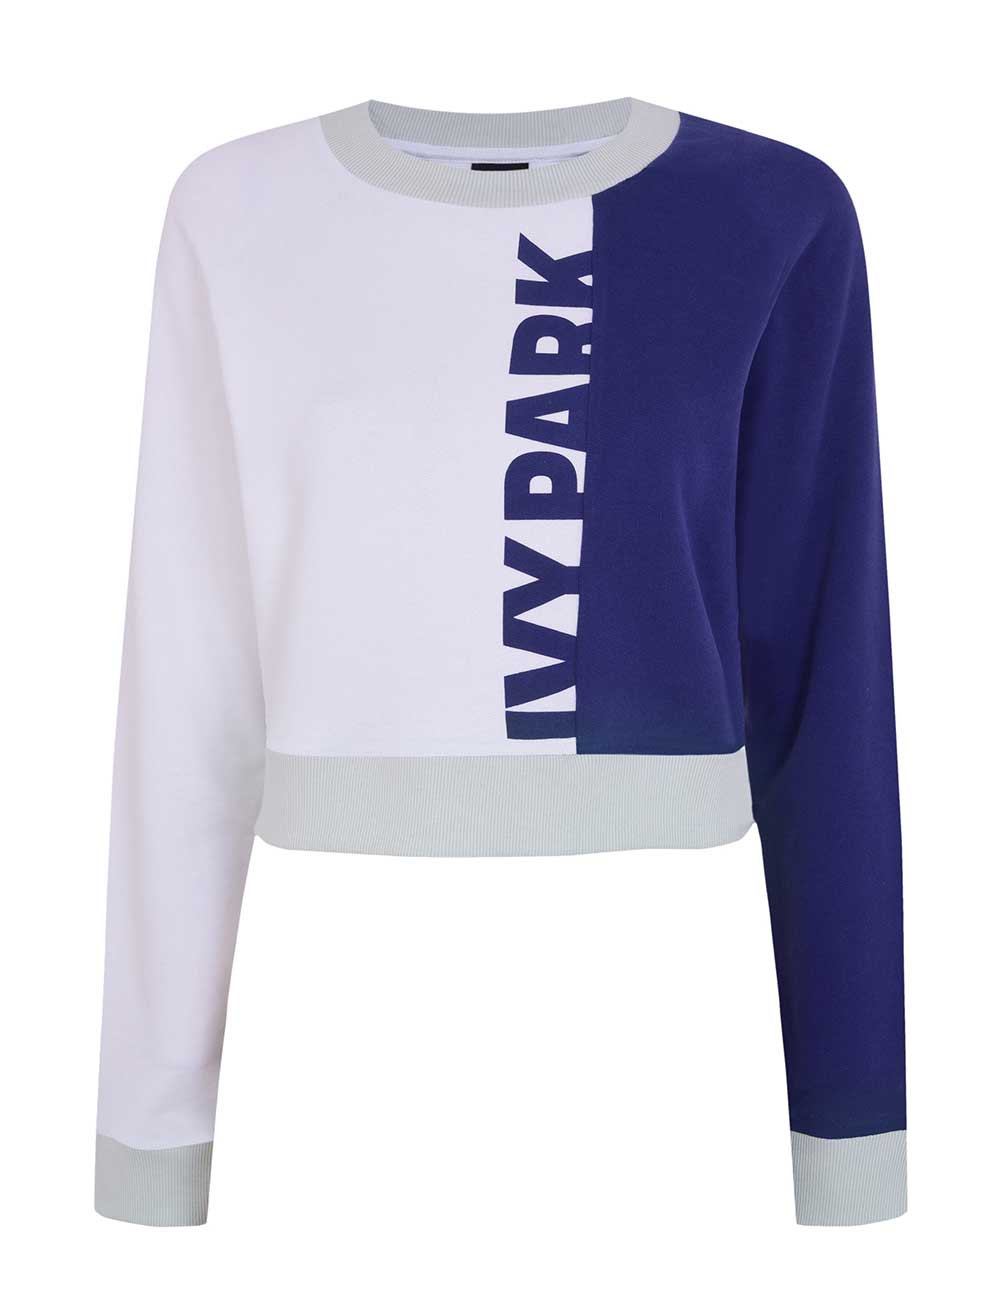 Colour Block Detailed Sweatshirt by Ivy Park, $80 from Topshop